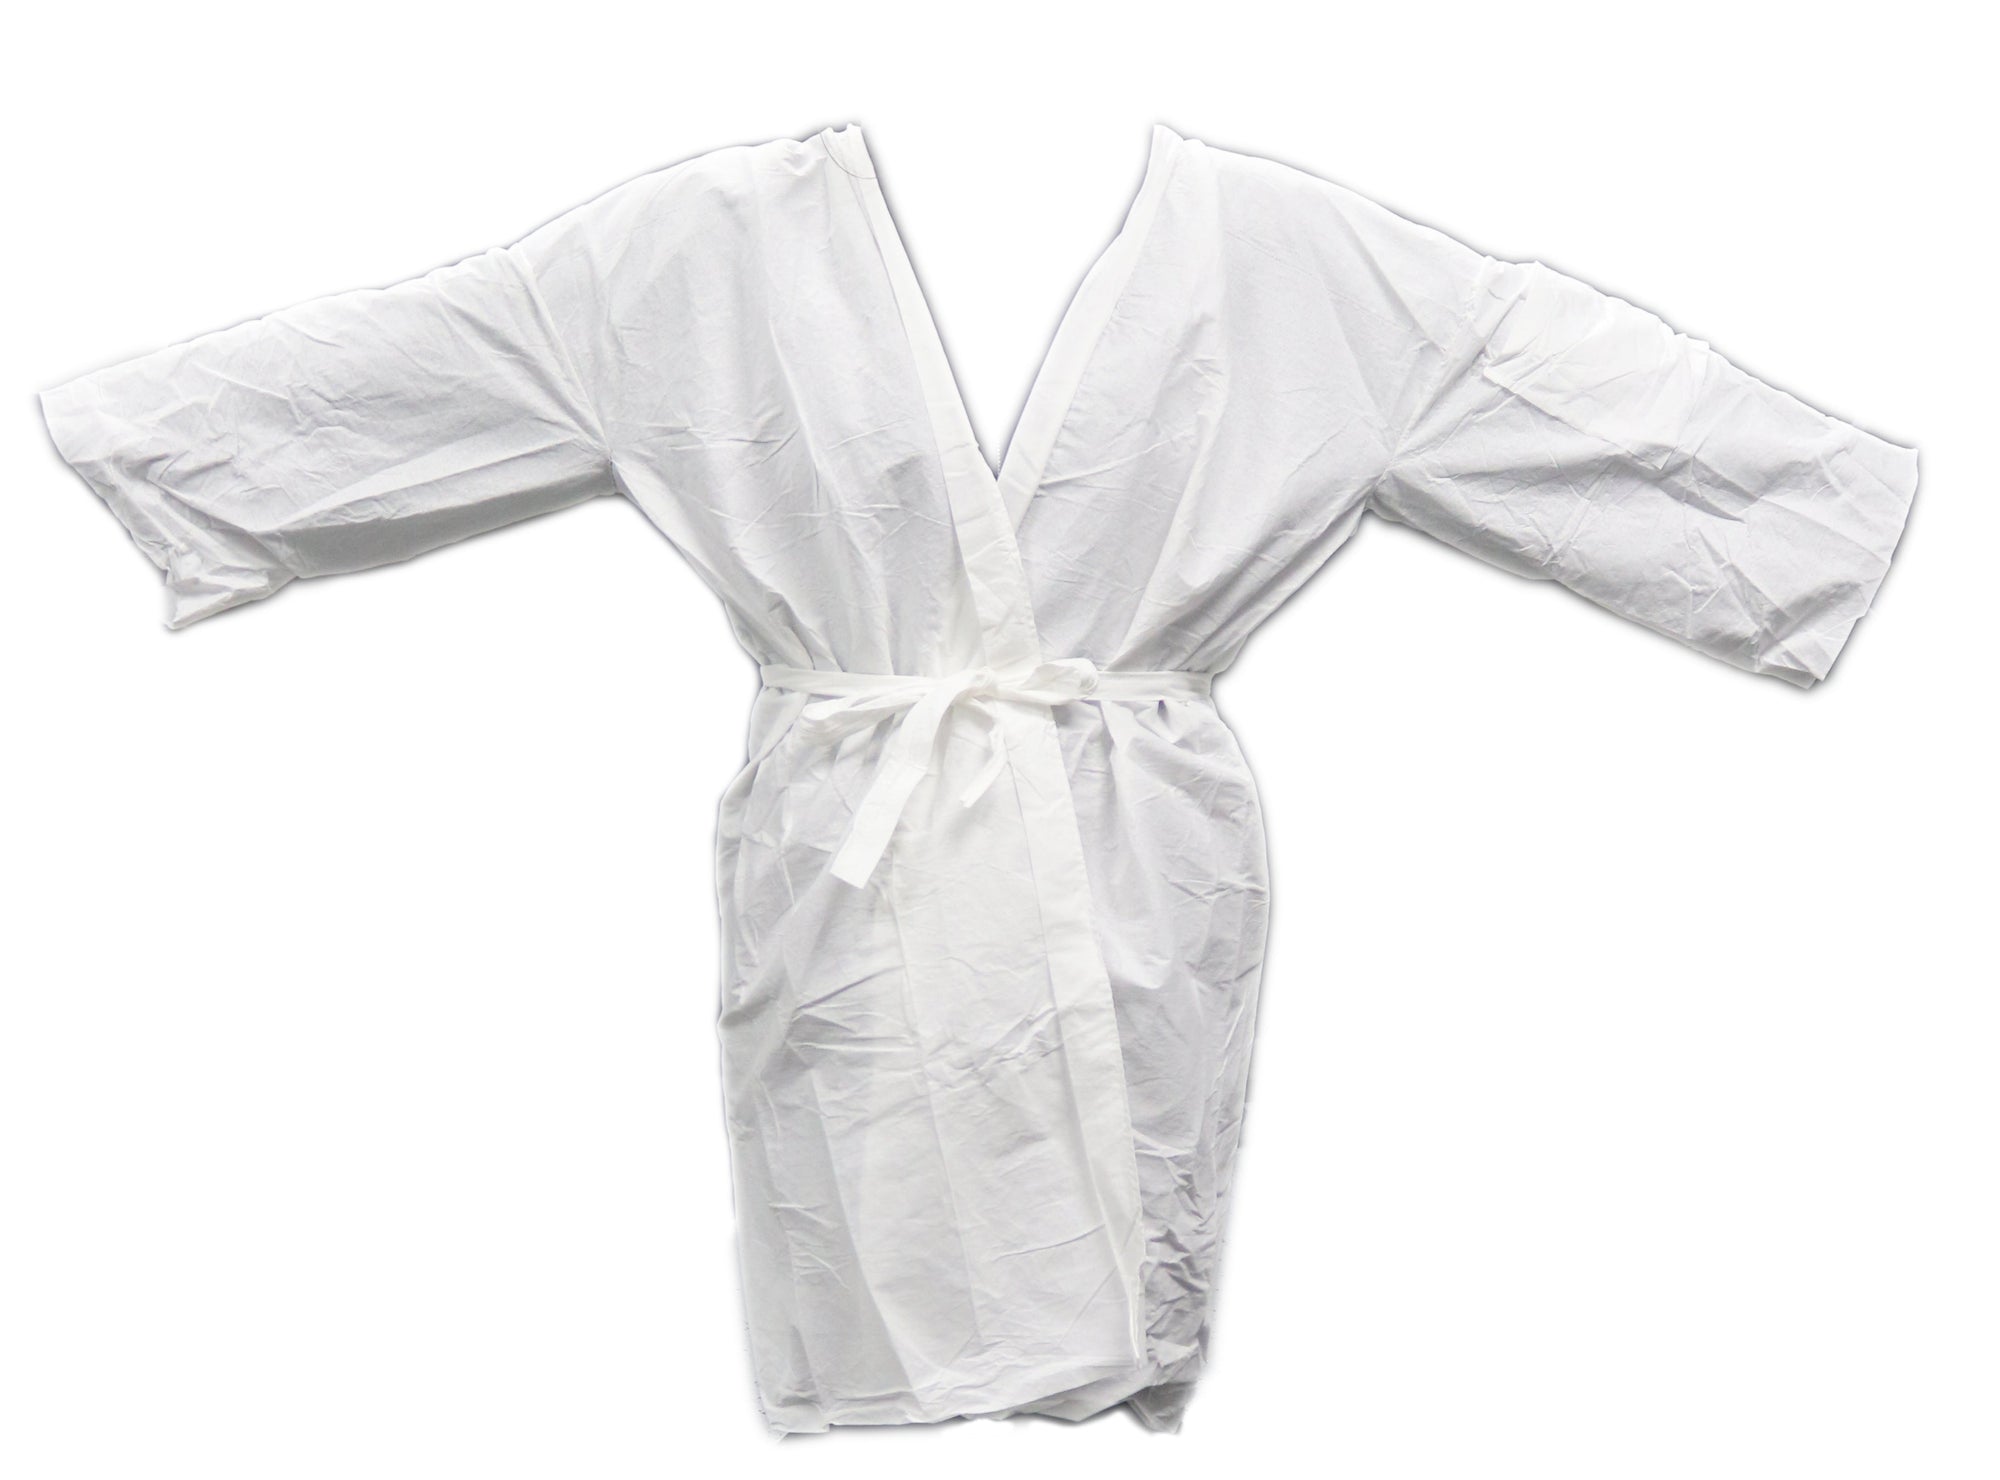 Disposable Wrap Around Gown (White) : PPE Goods from Hair Art HairArt Int'l Inc.